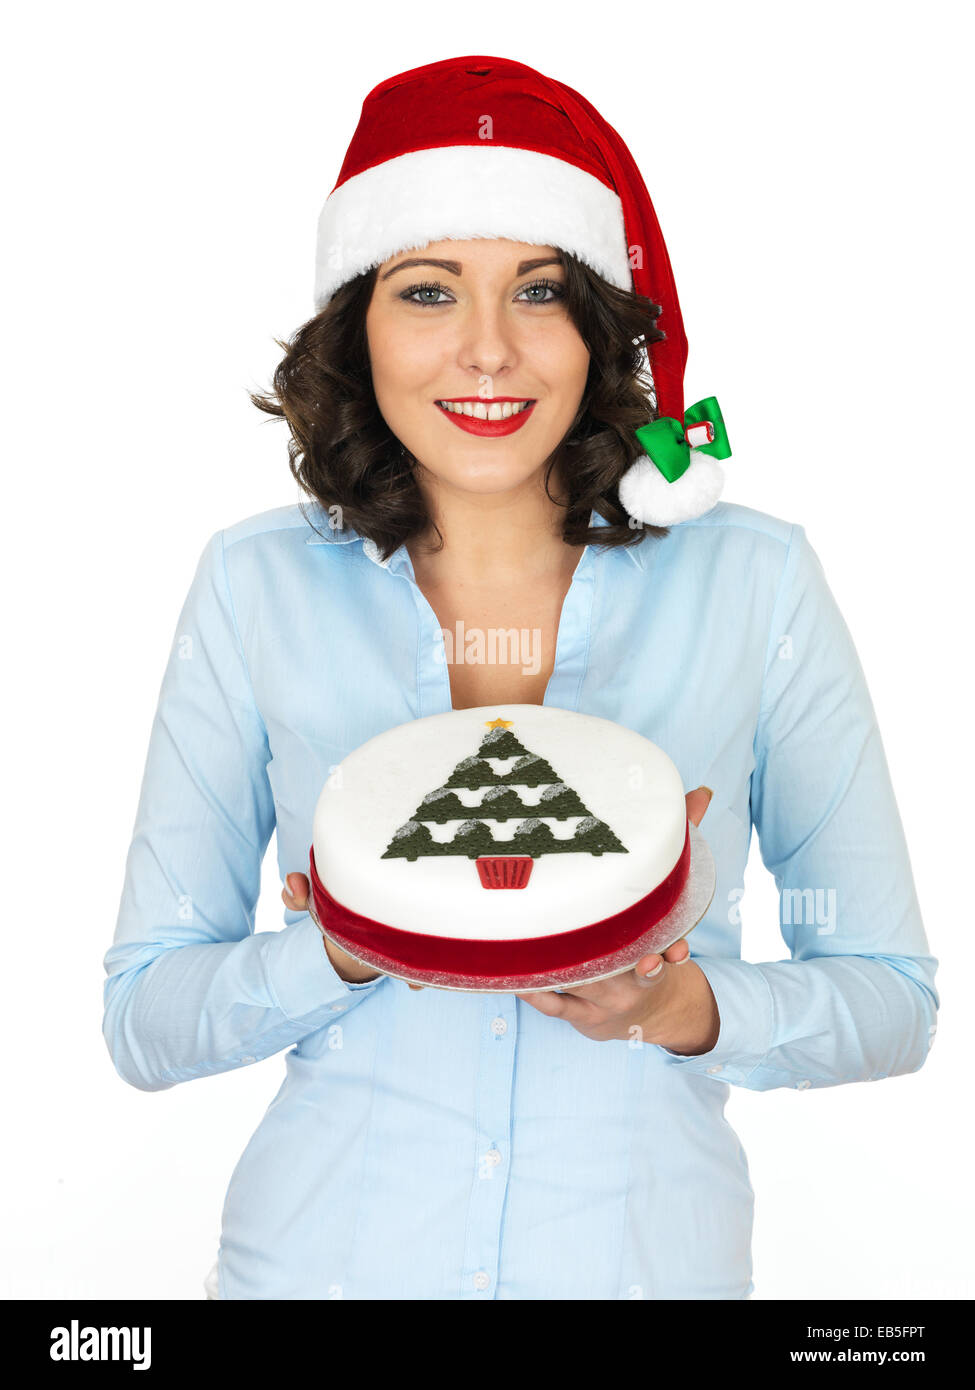 Confident Young Woman Wearing A Red Santa Hat Holding A Rich Iced Christmas Fruit Cake Isolated Against A White Background With A Clipping Path Stock Photo